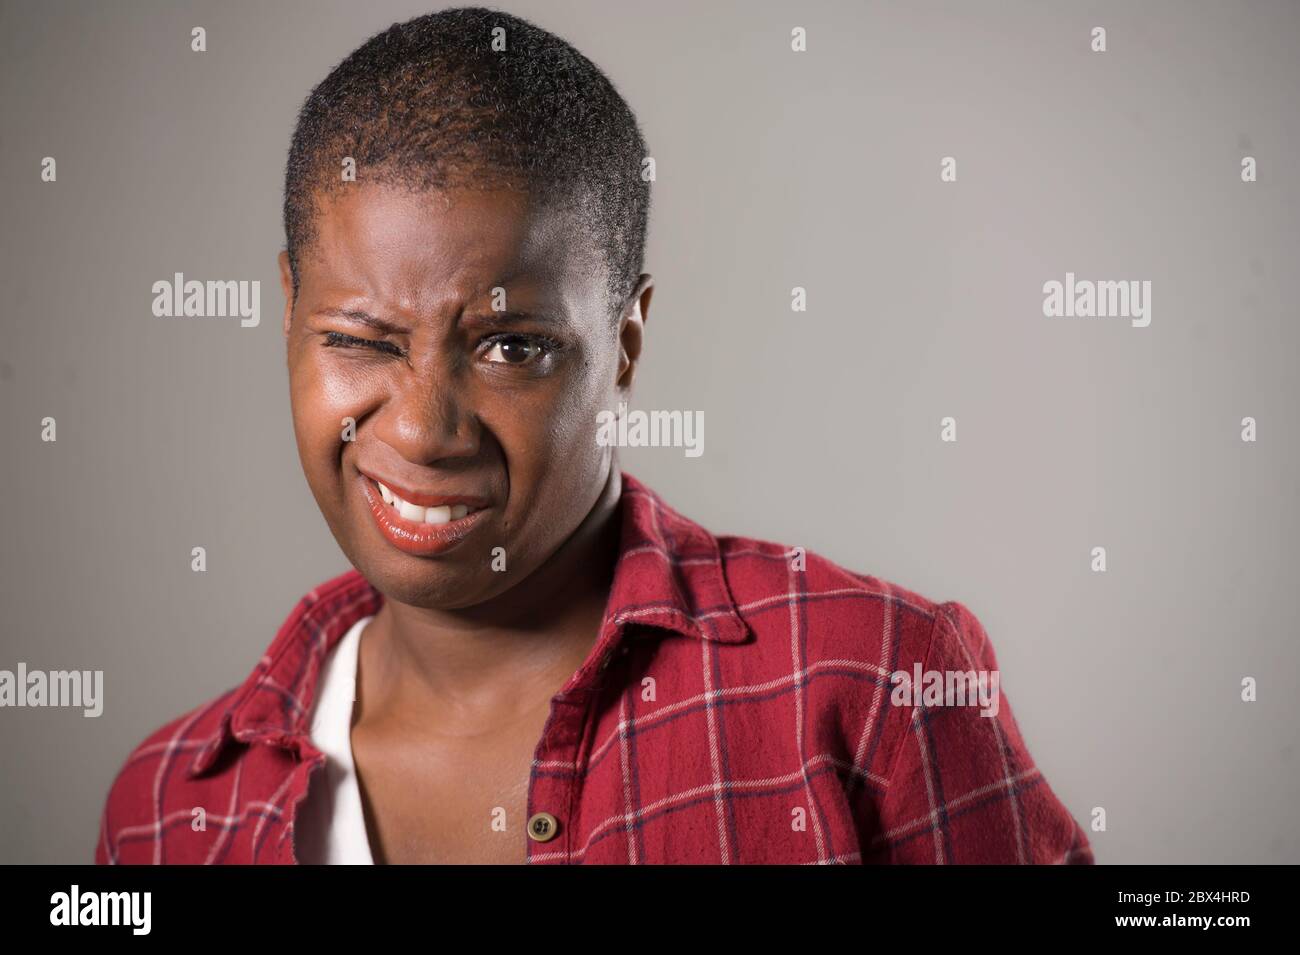 lifestyle portrait if young unhappy and pretty african American woman in contempt and disgust face expression as if disliking or finding disgusting is Stock Photo